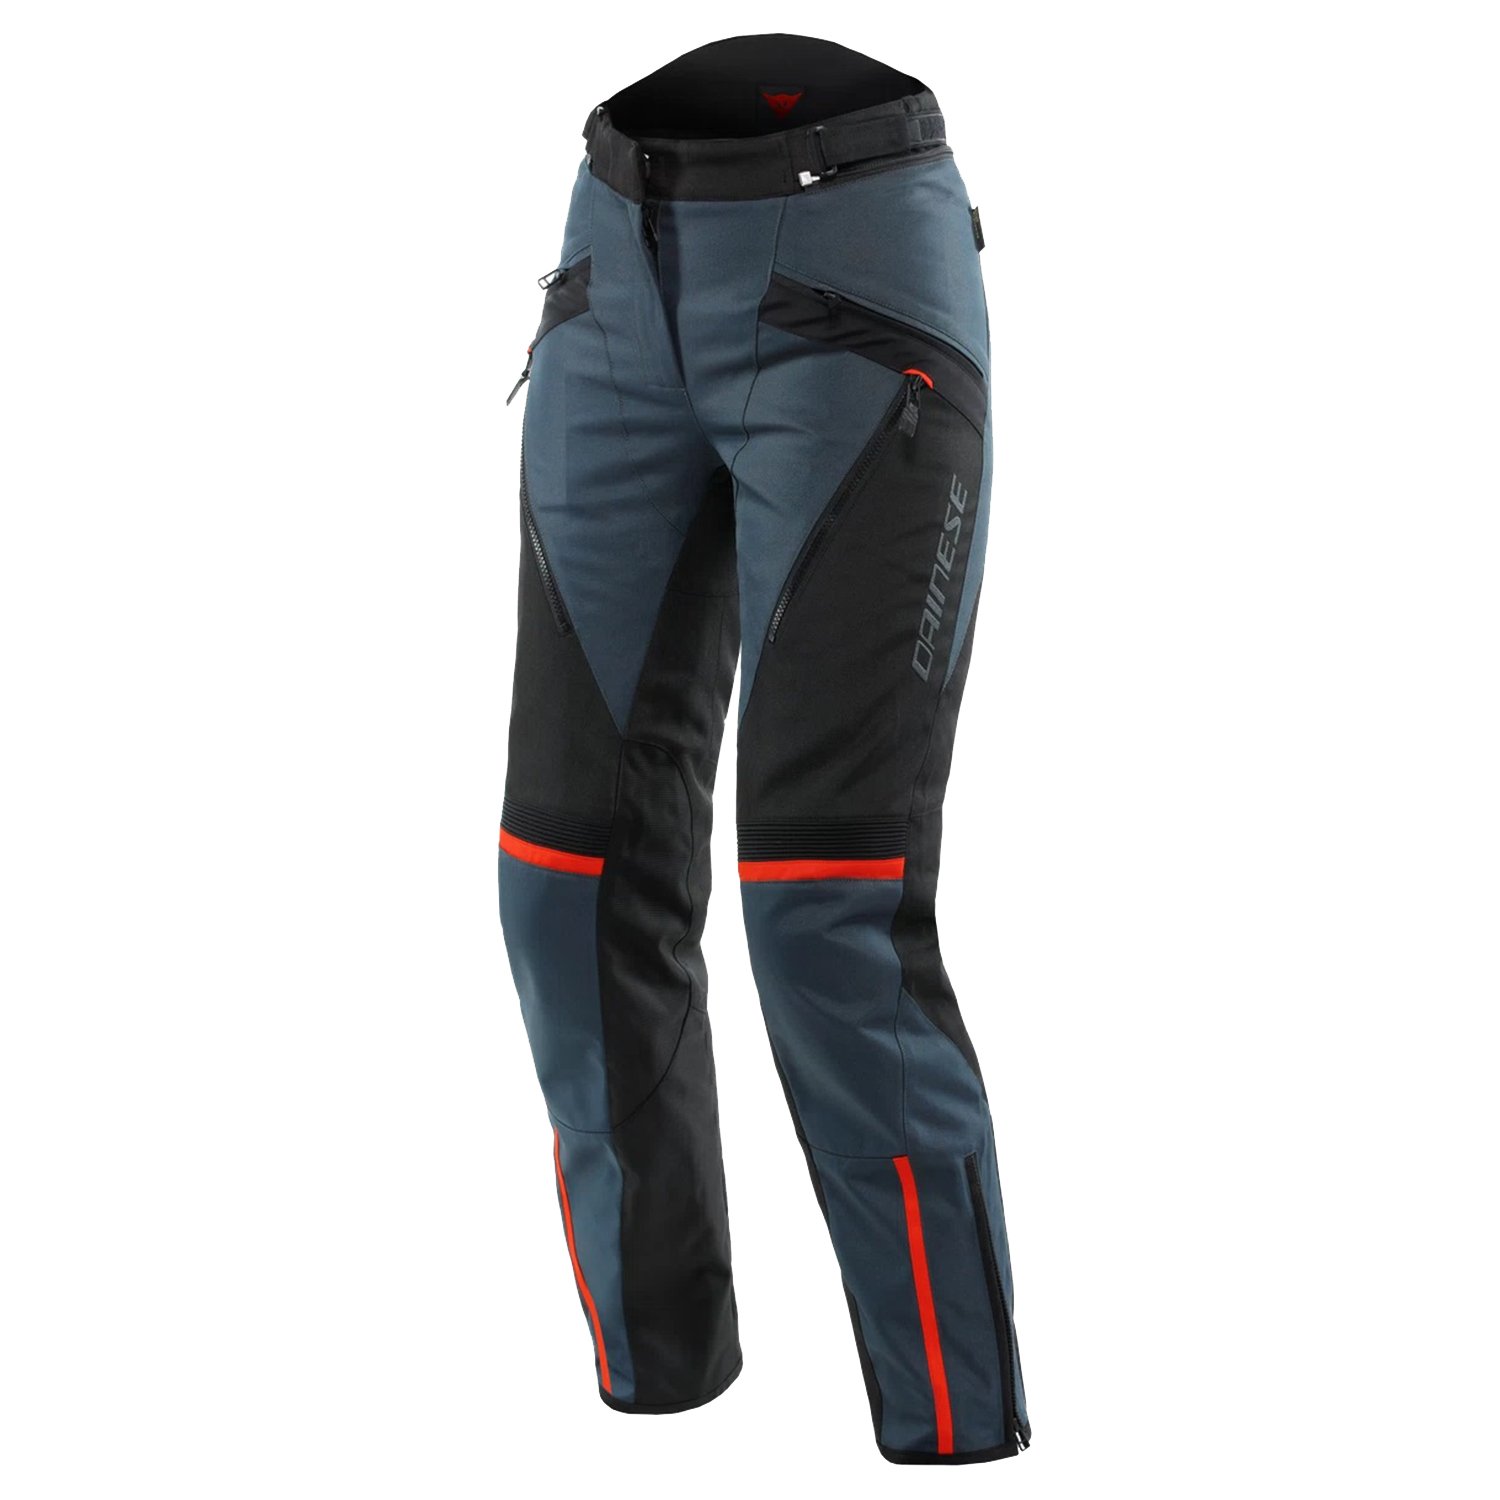 Image of Dainese Tempest 3 D-Dry Lady Pants Ebony Black Lava Red Talla 44